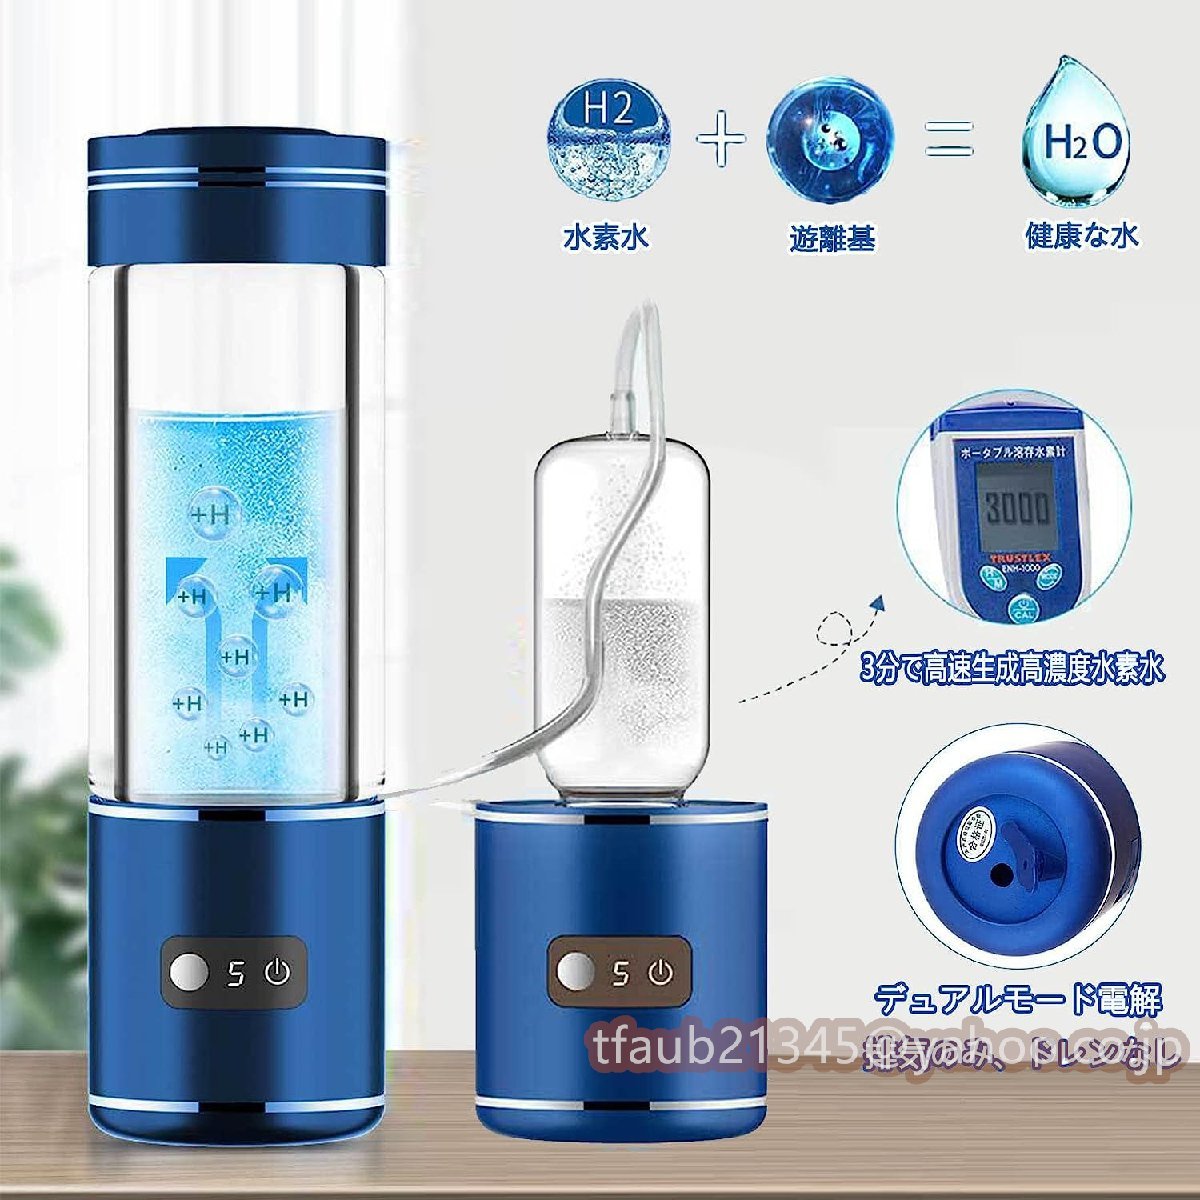  water element aquatic . vessel high density portable magnetism adsorption rechargeable water element water bottle 2000PPB one pcs three position 350ML cold water / hot water circulation bottle type electrolysis water machine beauty health 